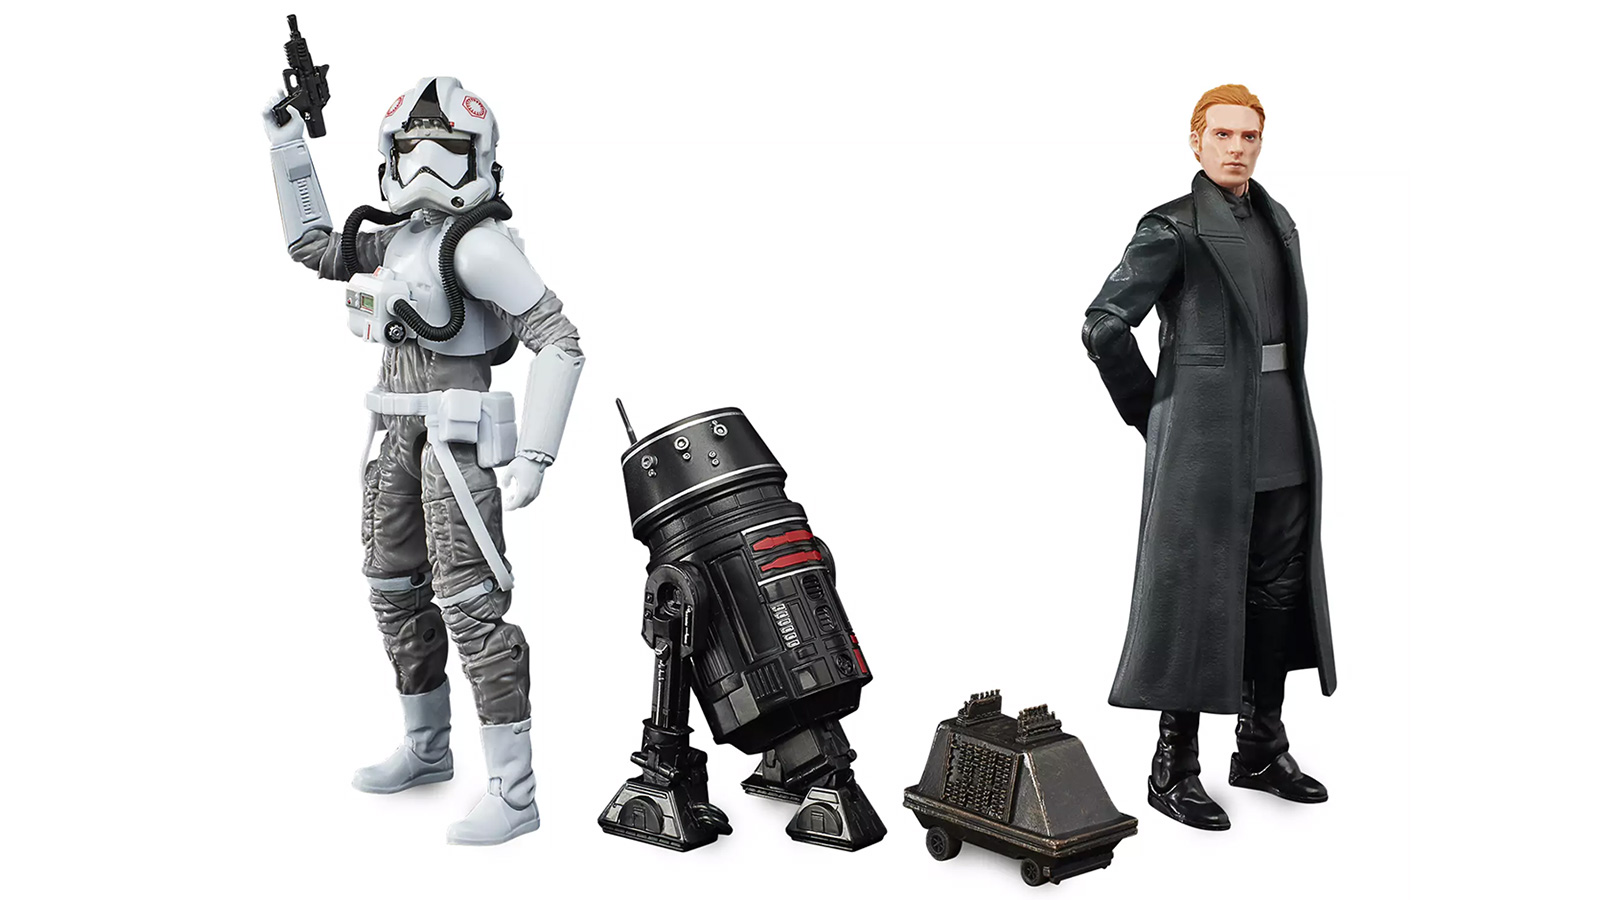 In Stock At Shop Disney And Preorders Shipping - Exclusive TBS 6-Inch The First Order (Set 2)